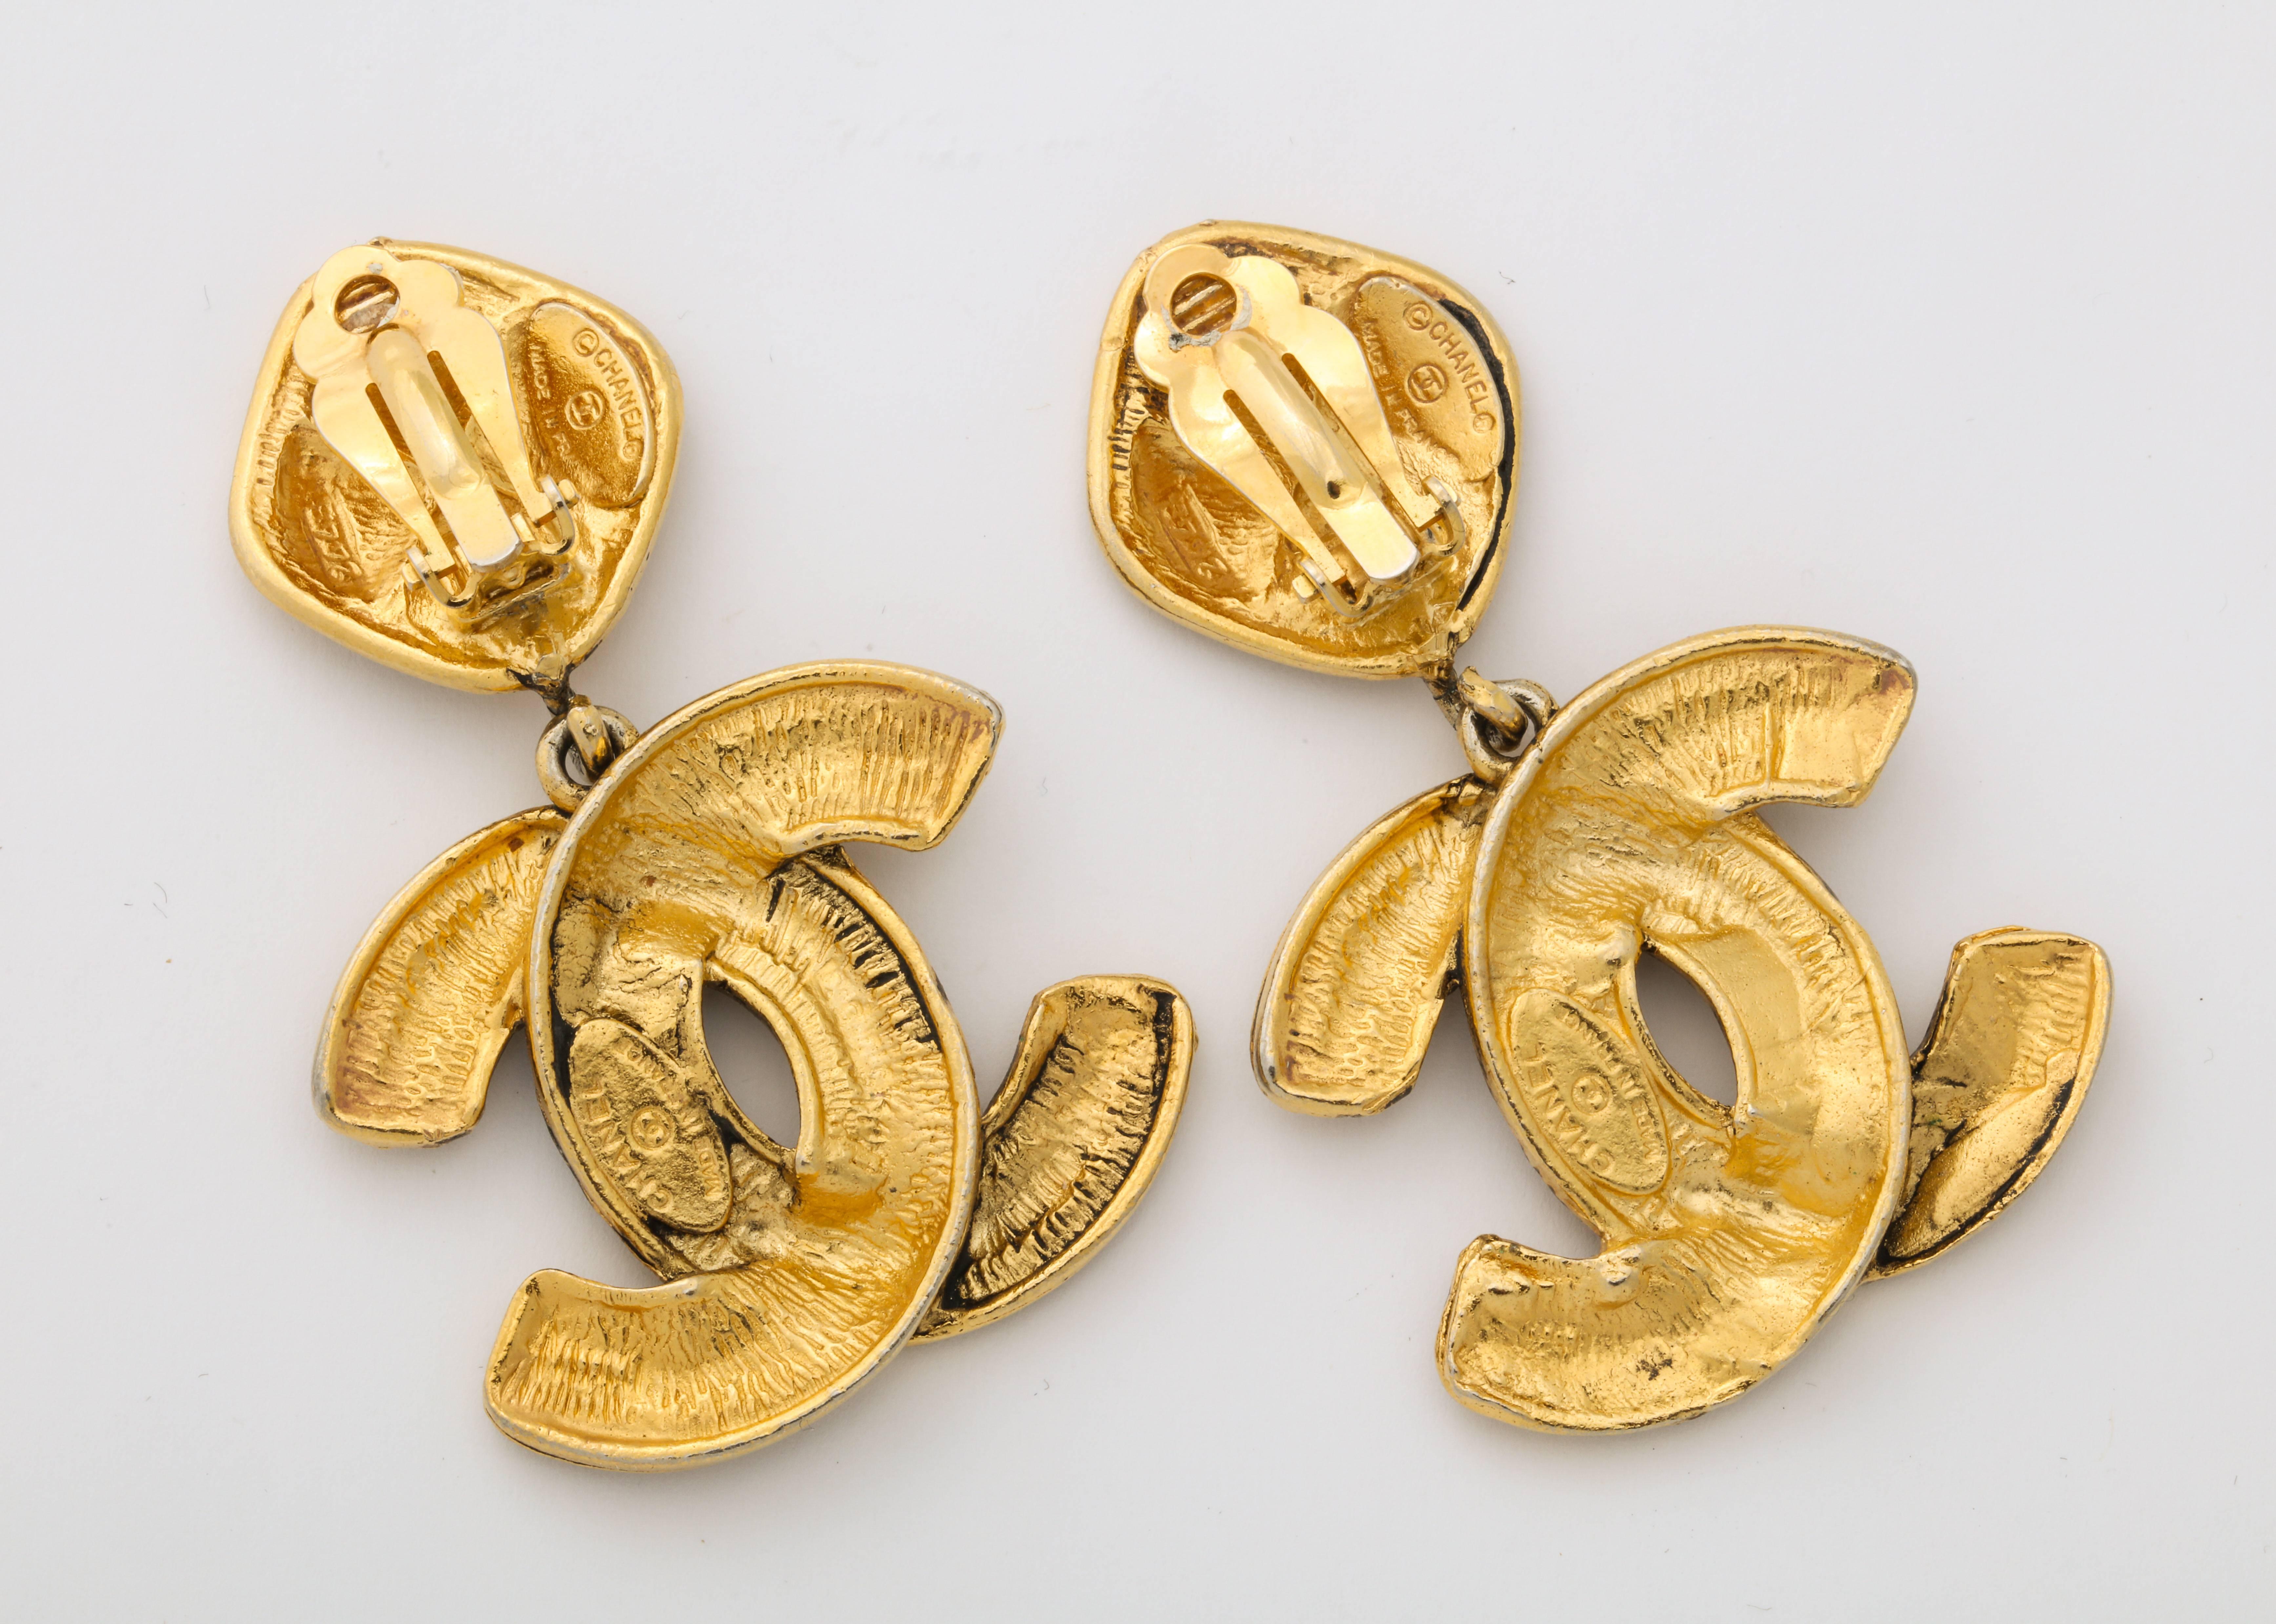 Contemporary Chanel Clip Earrings with Double C logo